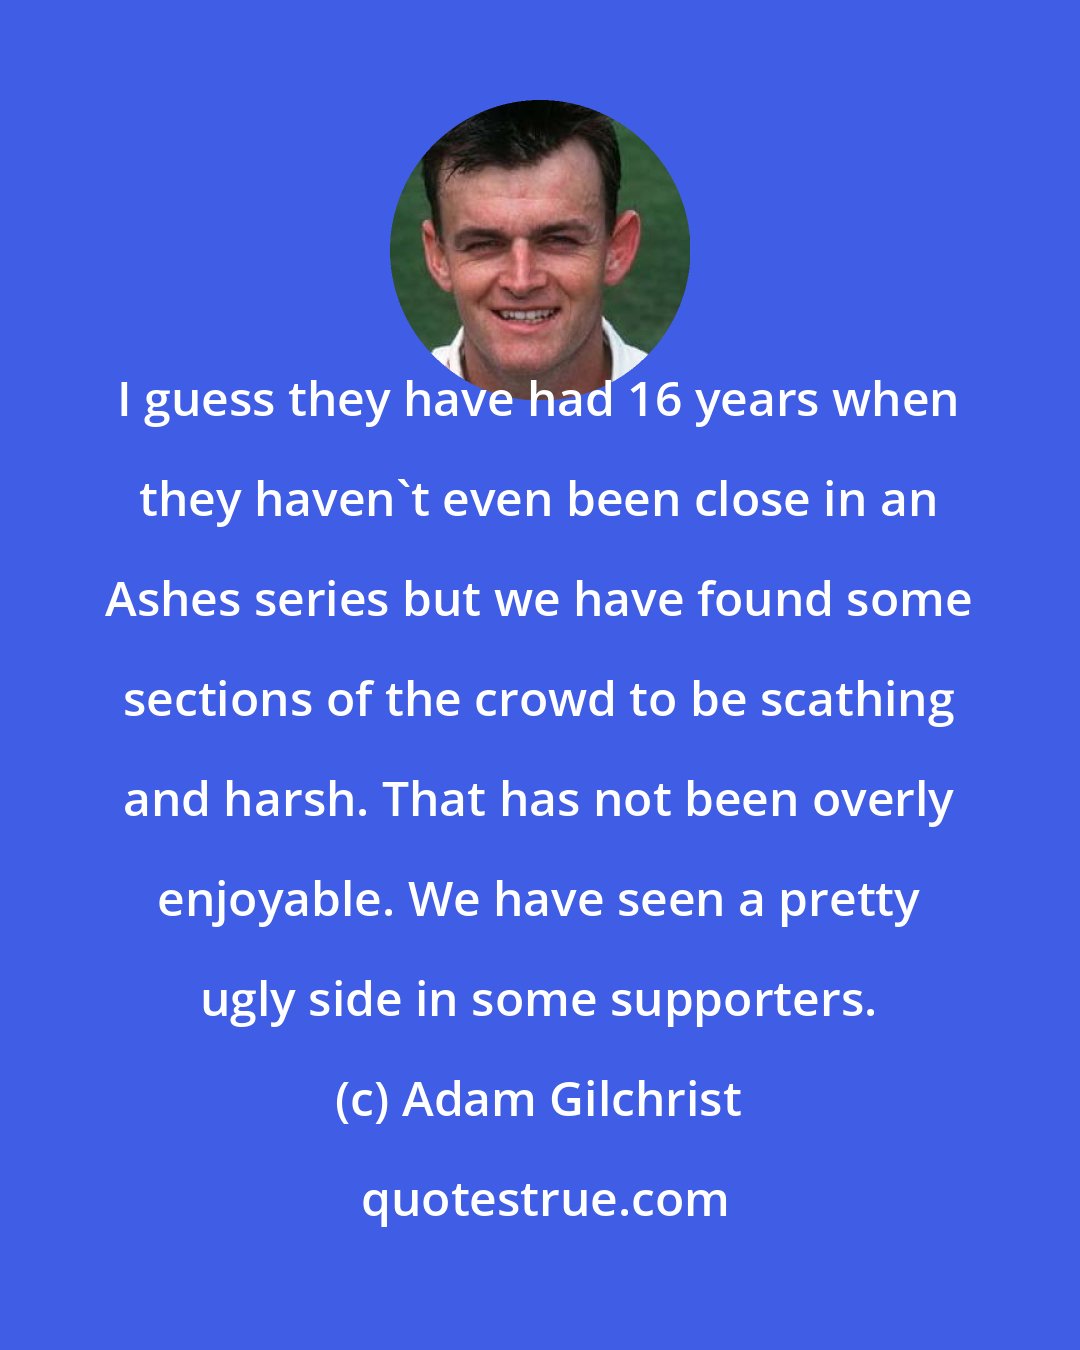 Adam Gilchrist: I guess they have had 16 years when they haven't even been close in an Ashes series but we have found some sections of the crowd to be scathing and harsh. That has not been overly enjoyable. We have seen a pretty ugly side in some supporters.